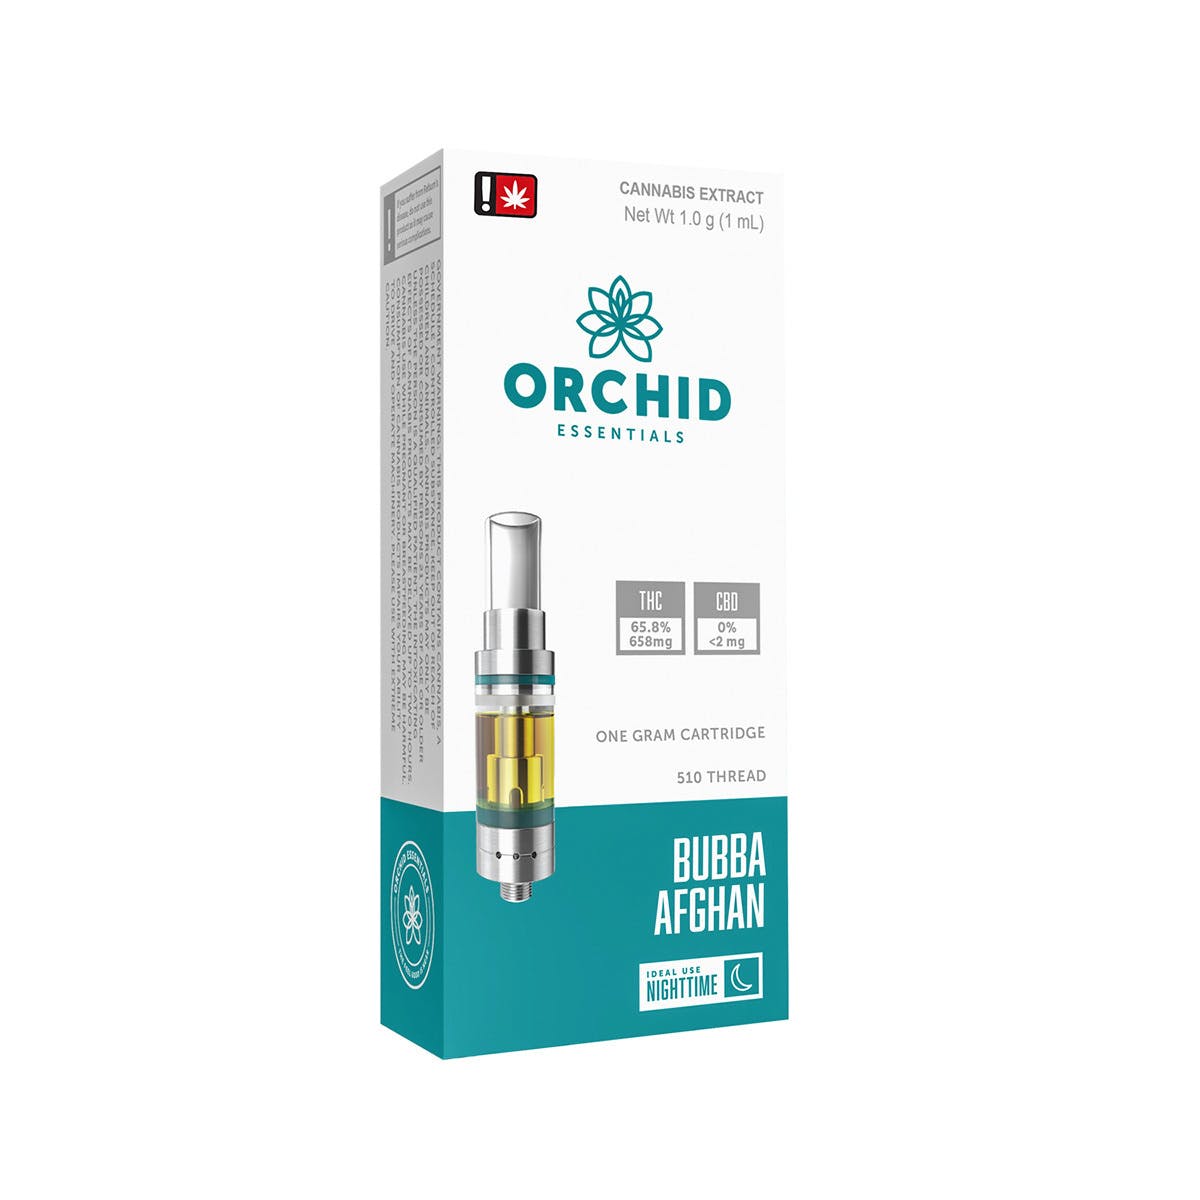 marijuana-dispensaries-oregon-cannabis-outlet-7th-ave-in-eugene-bubba-afghan-1g-refill-cartridge